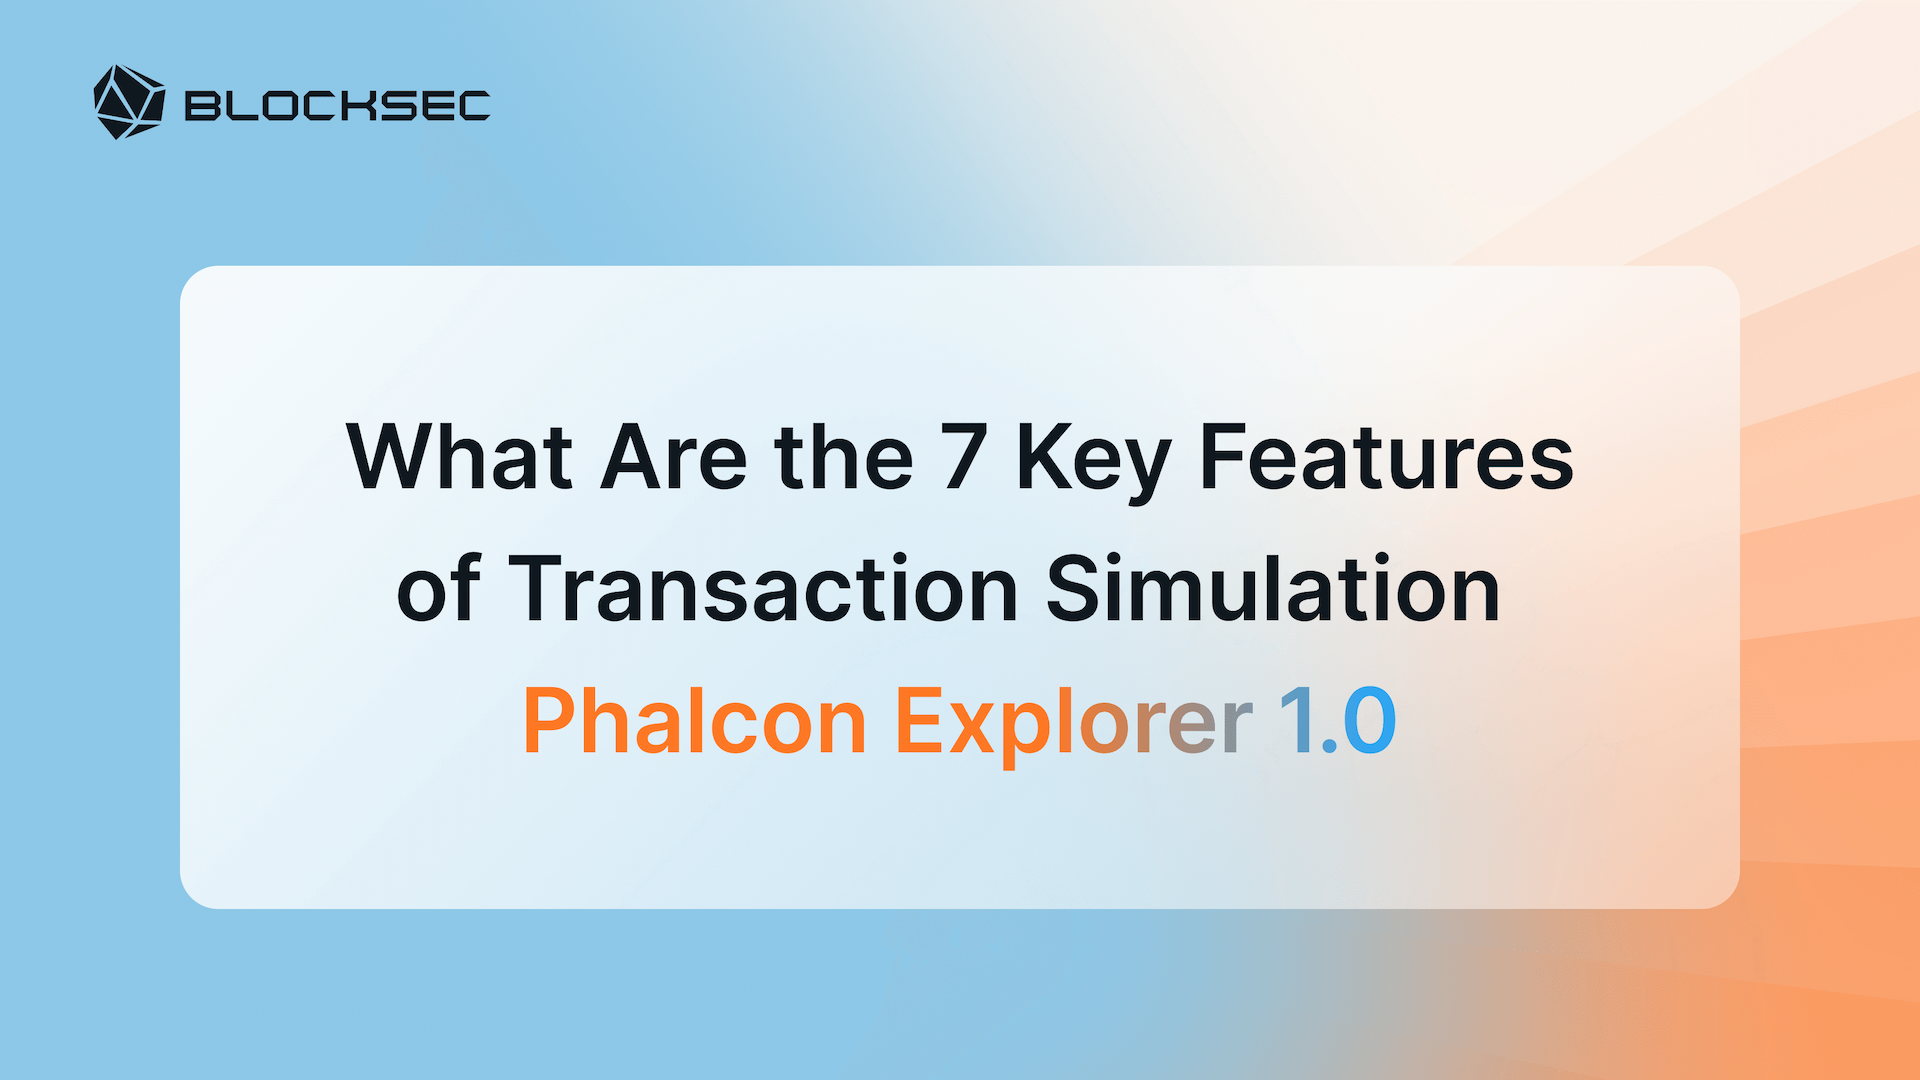 What Are the 7 Key Features of Transaction Simulation Phalcon Explorer 1.0